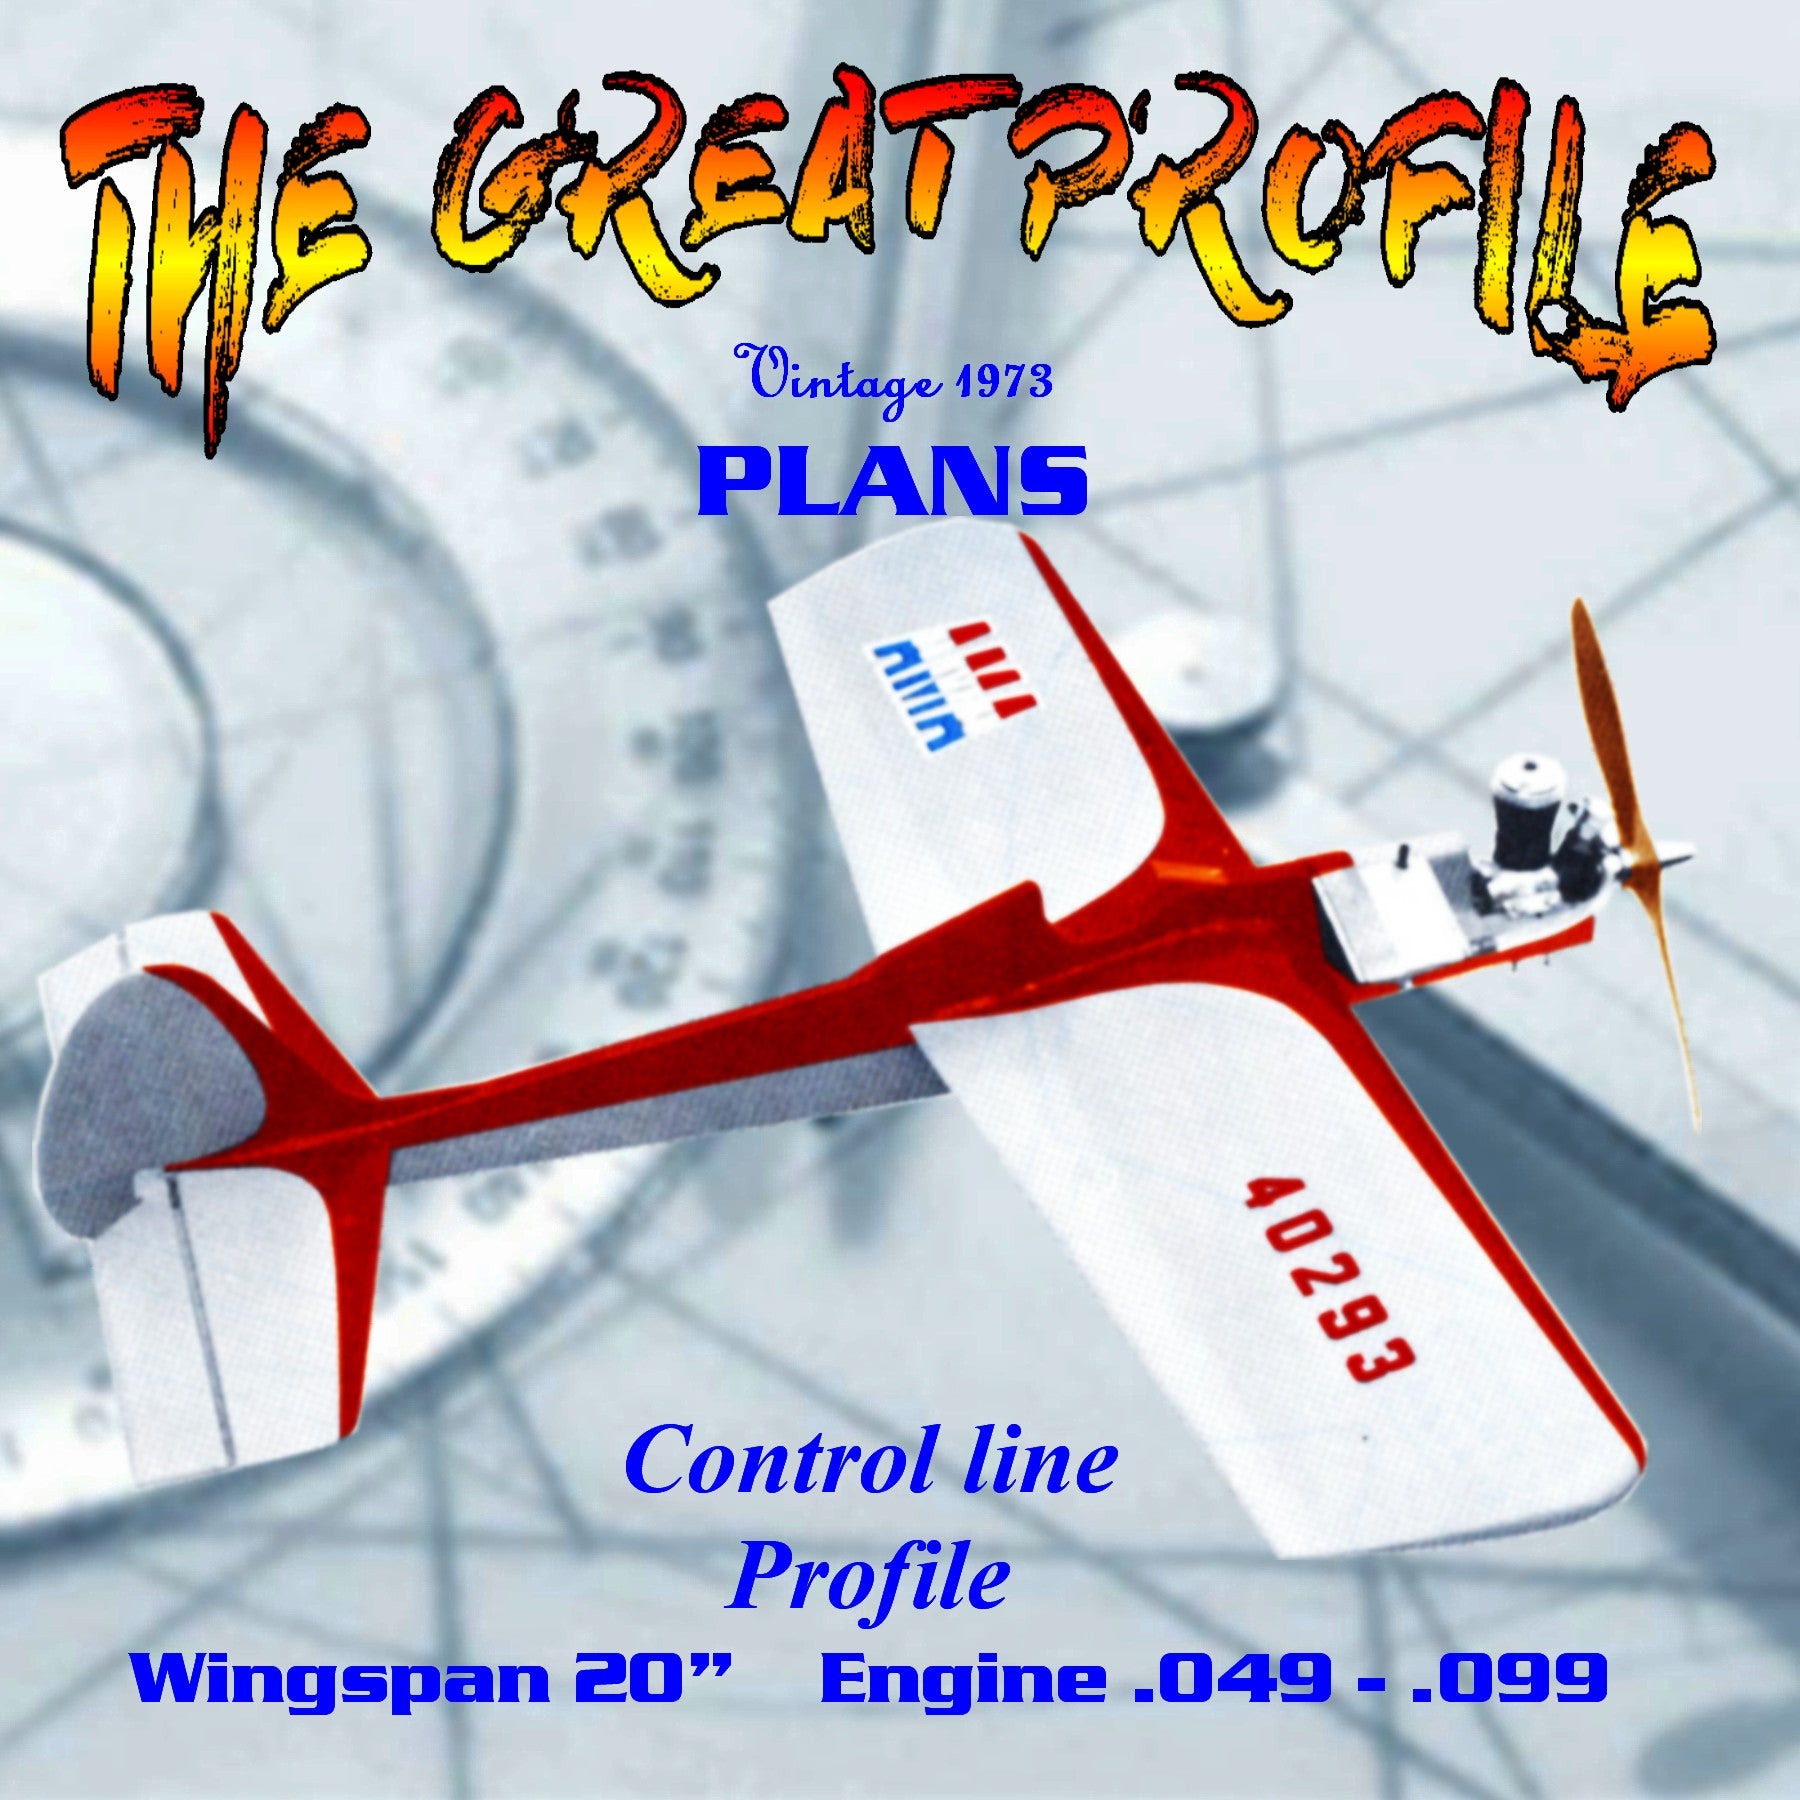 full size printed plan rugged control line trainer the great profile is easy to build, economical, and a snap to fly